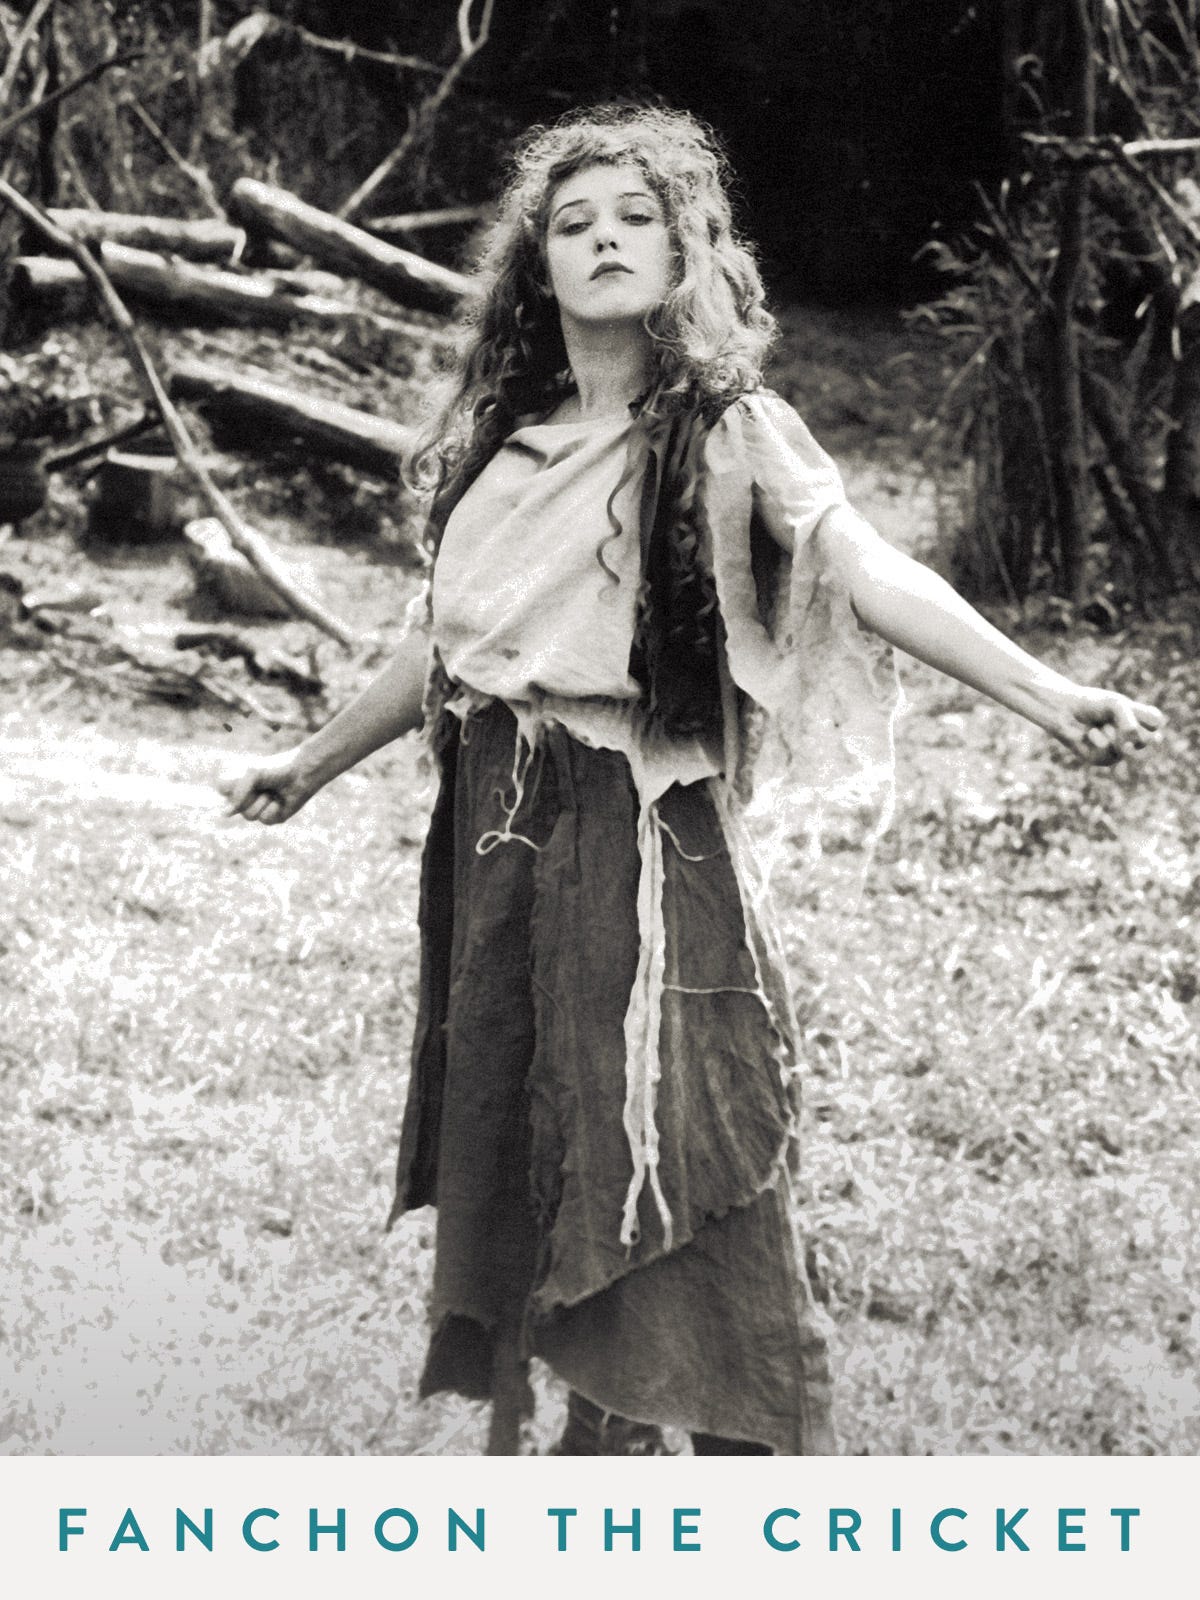 Fanchon the Cricket (1915) - Mary Pickford Foundation